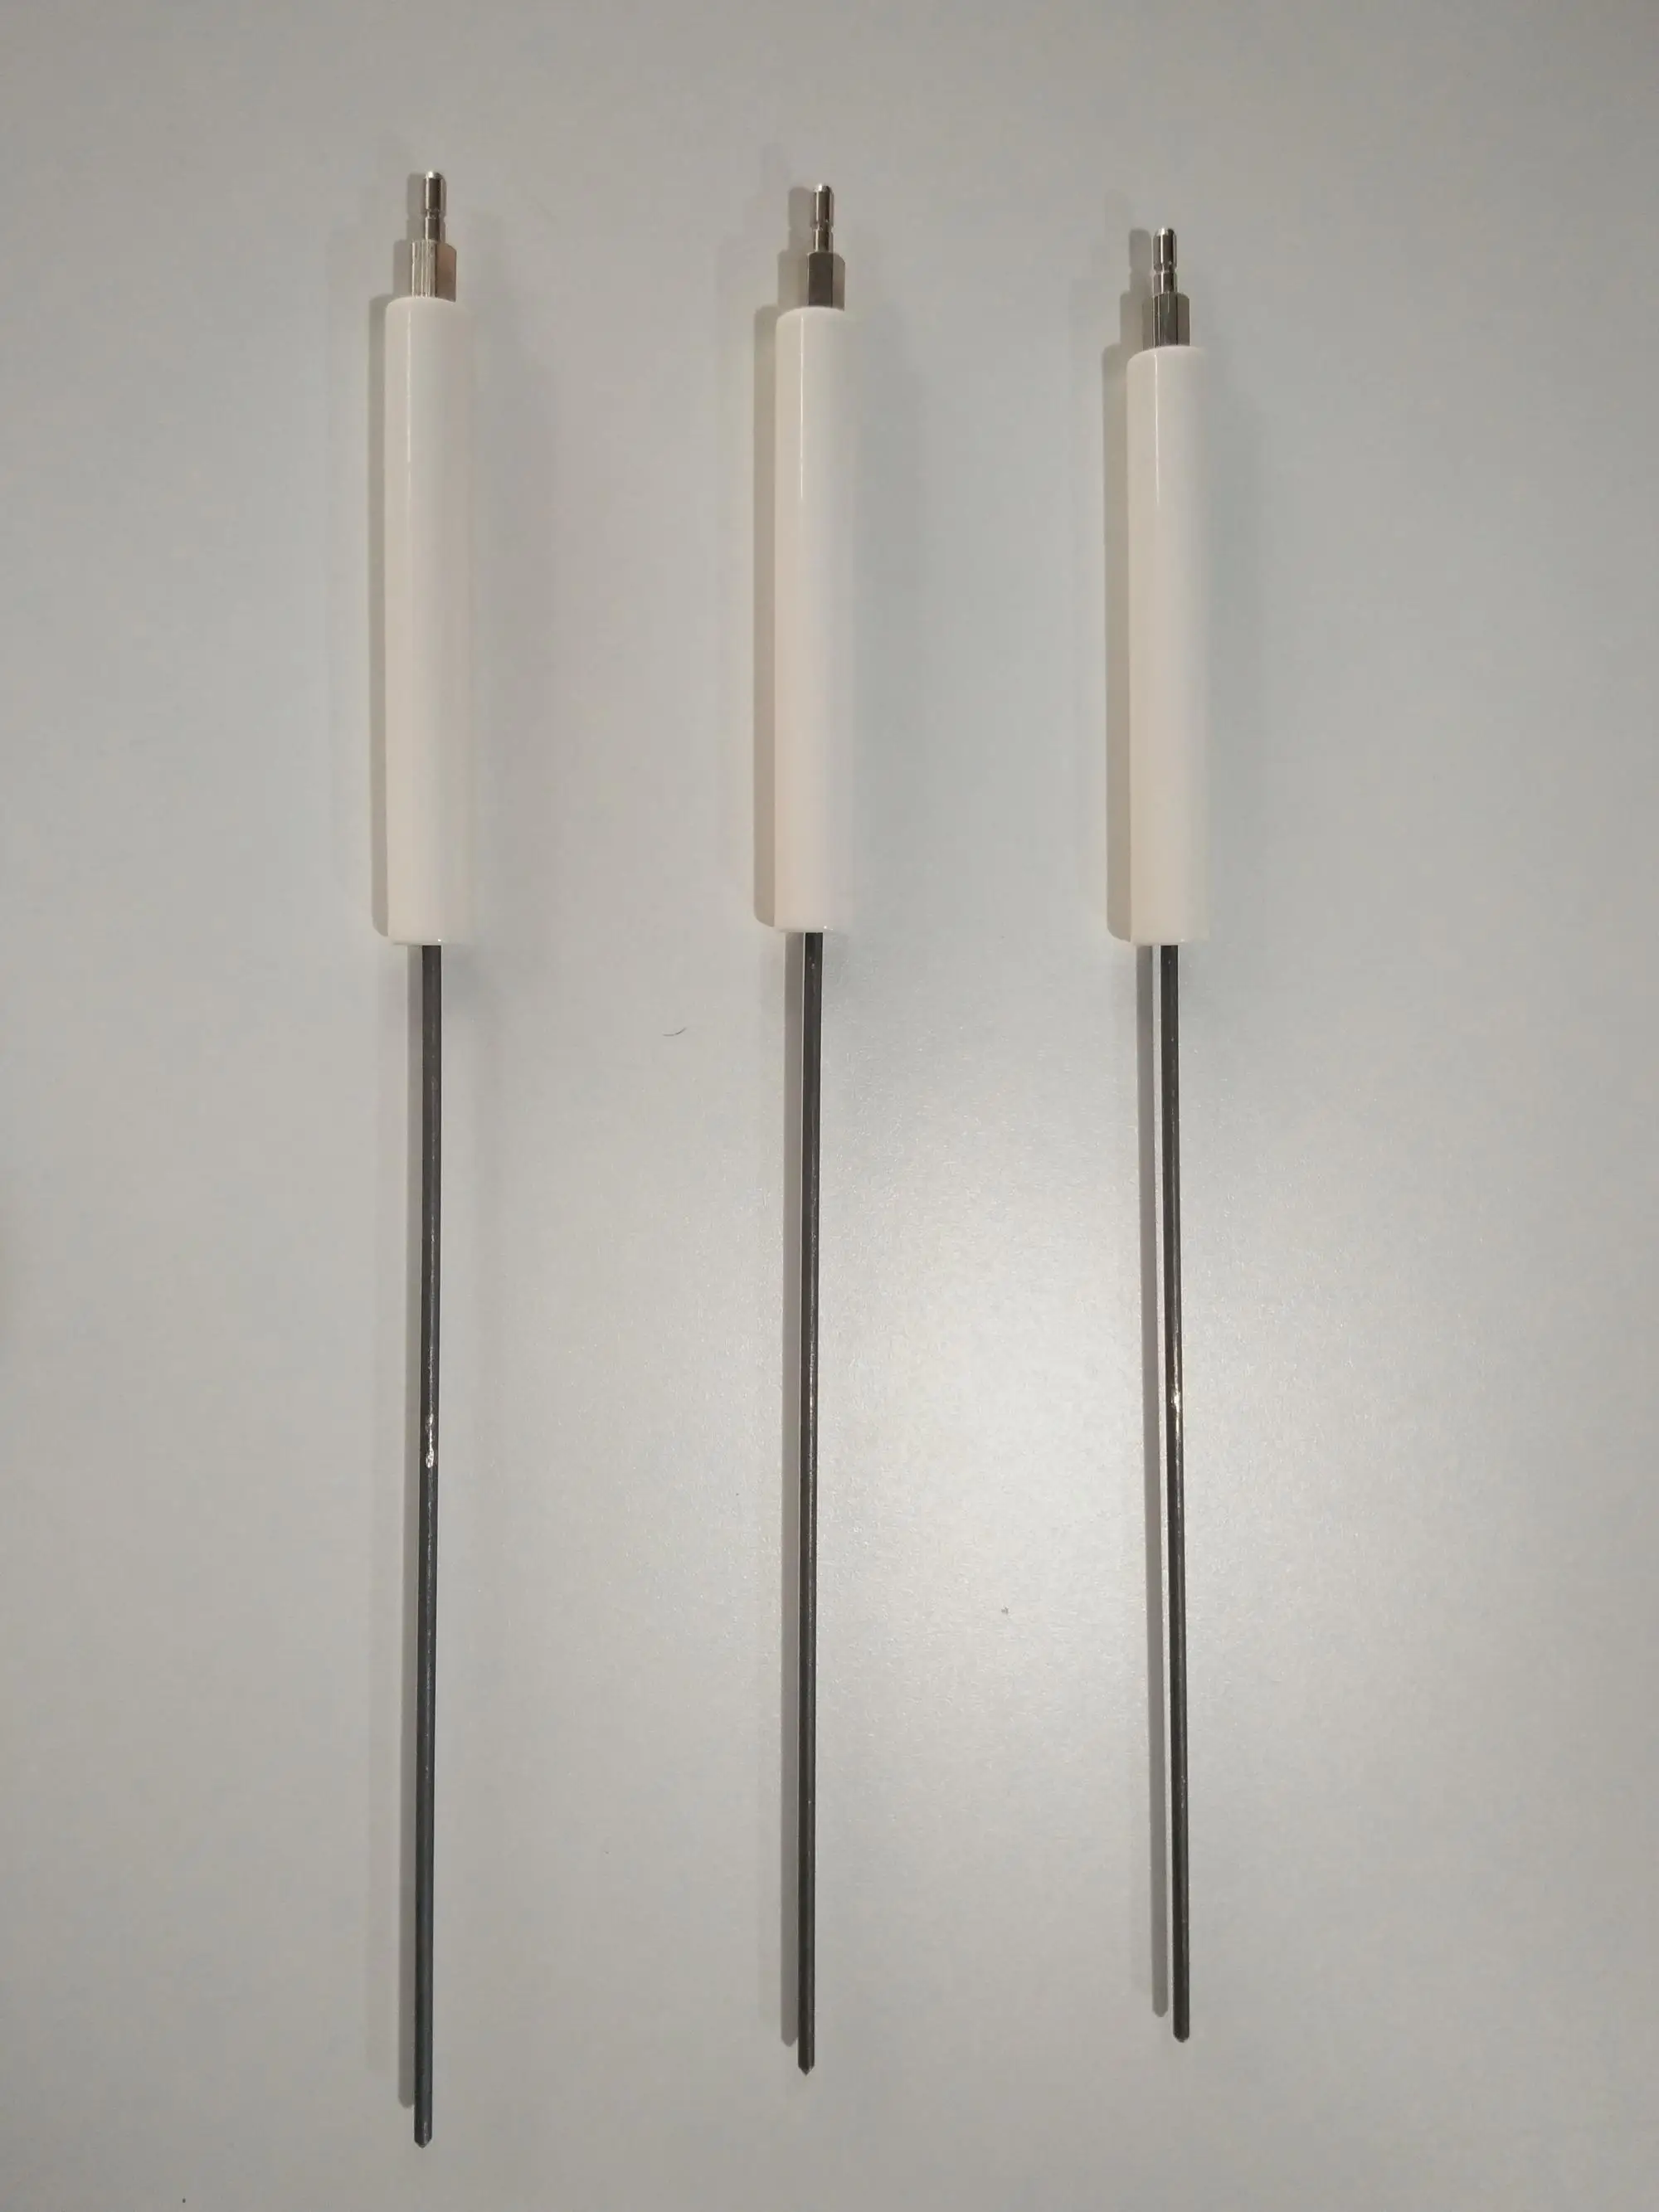 Ignition electrodes for gas burners